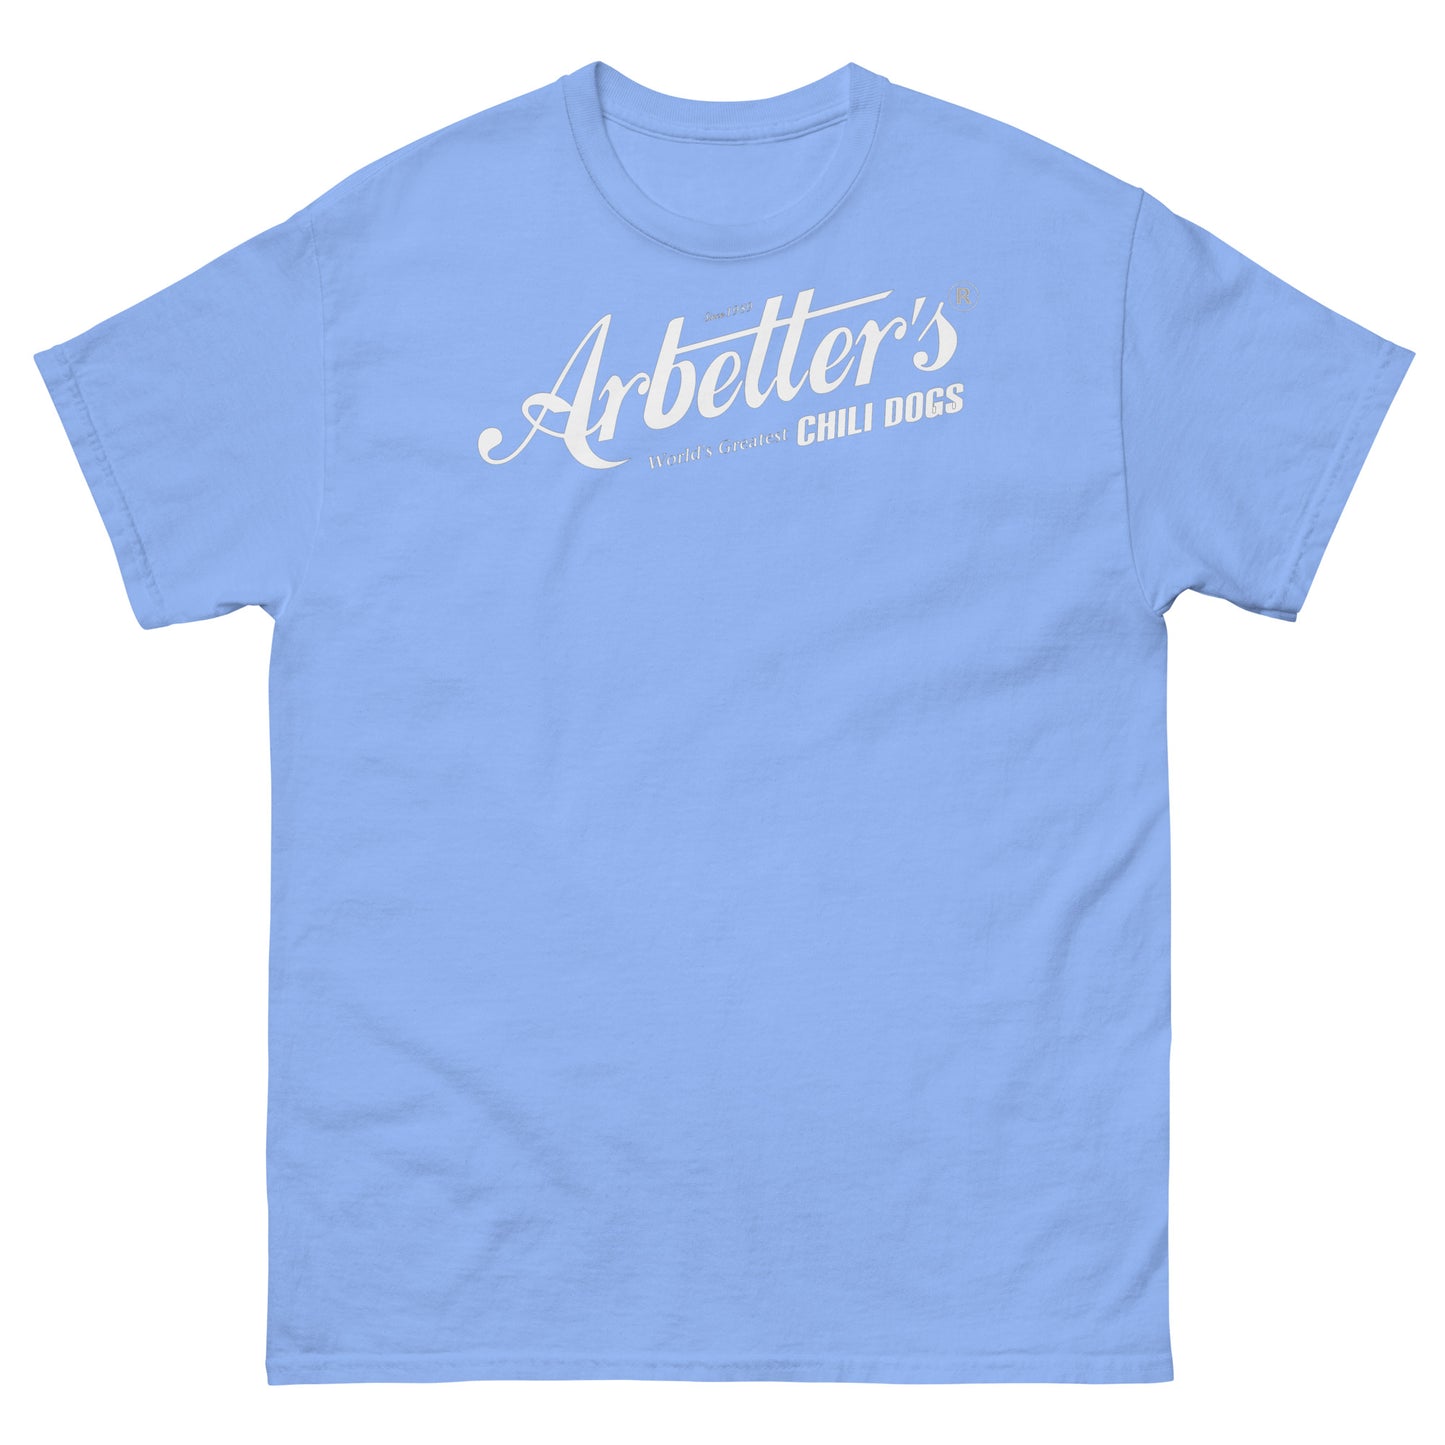 Before/After Arbetter's Men's classic tee